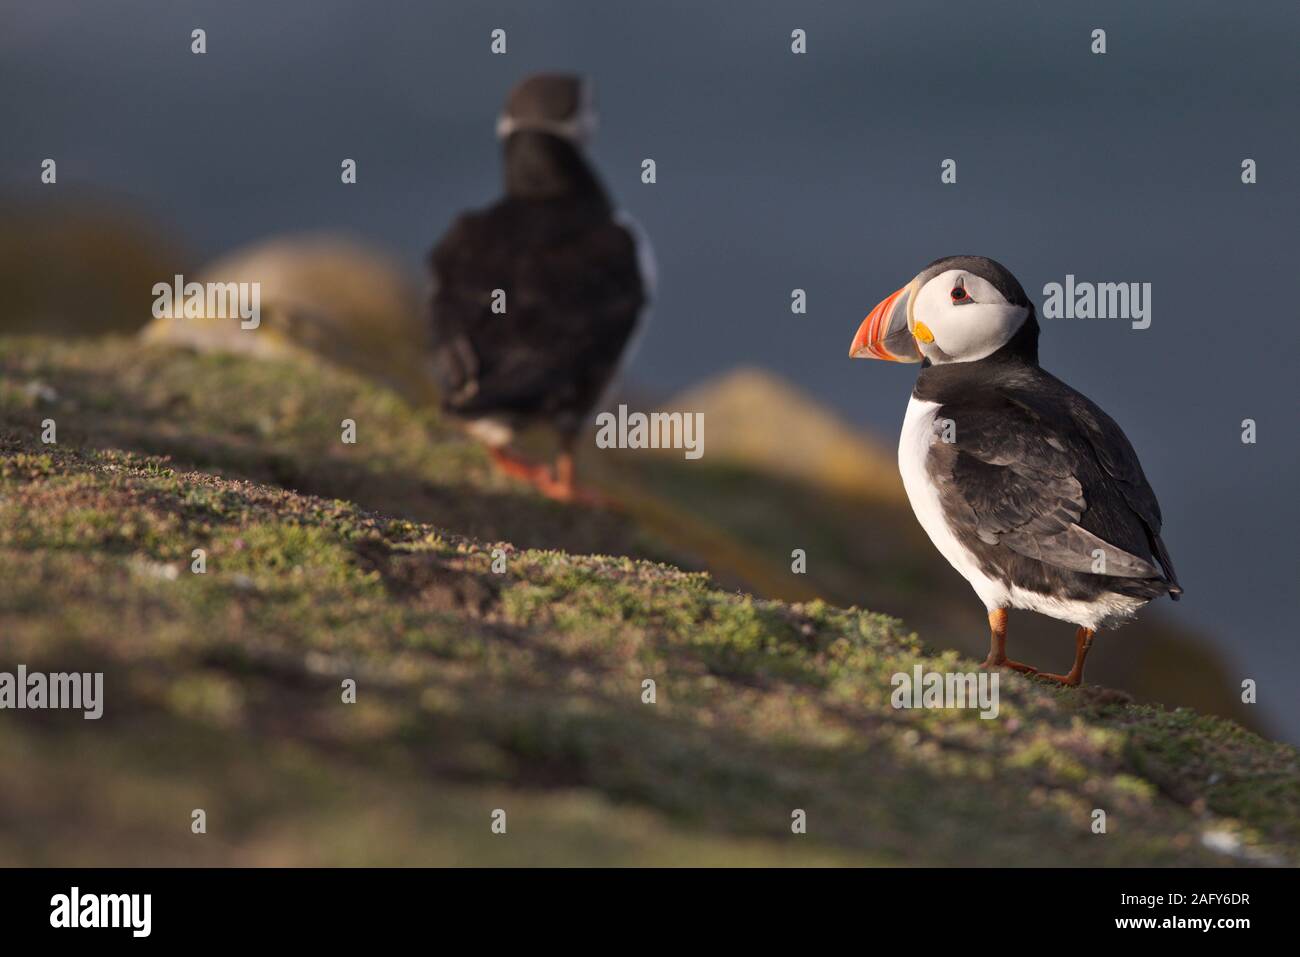 A puffin basks in evening sunlight Stock Photo